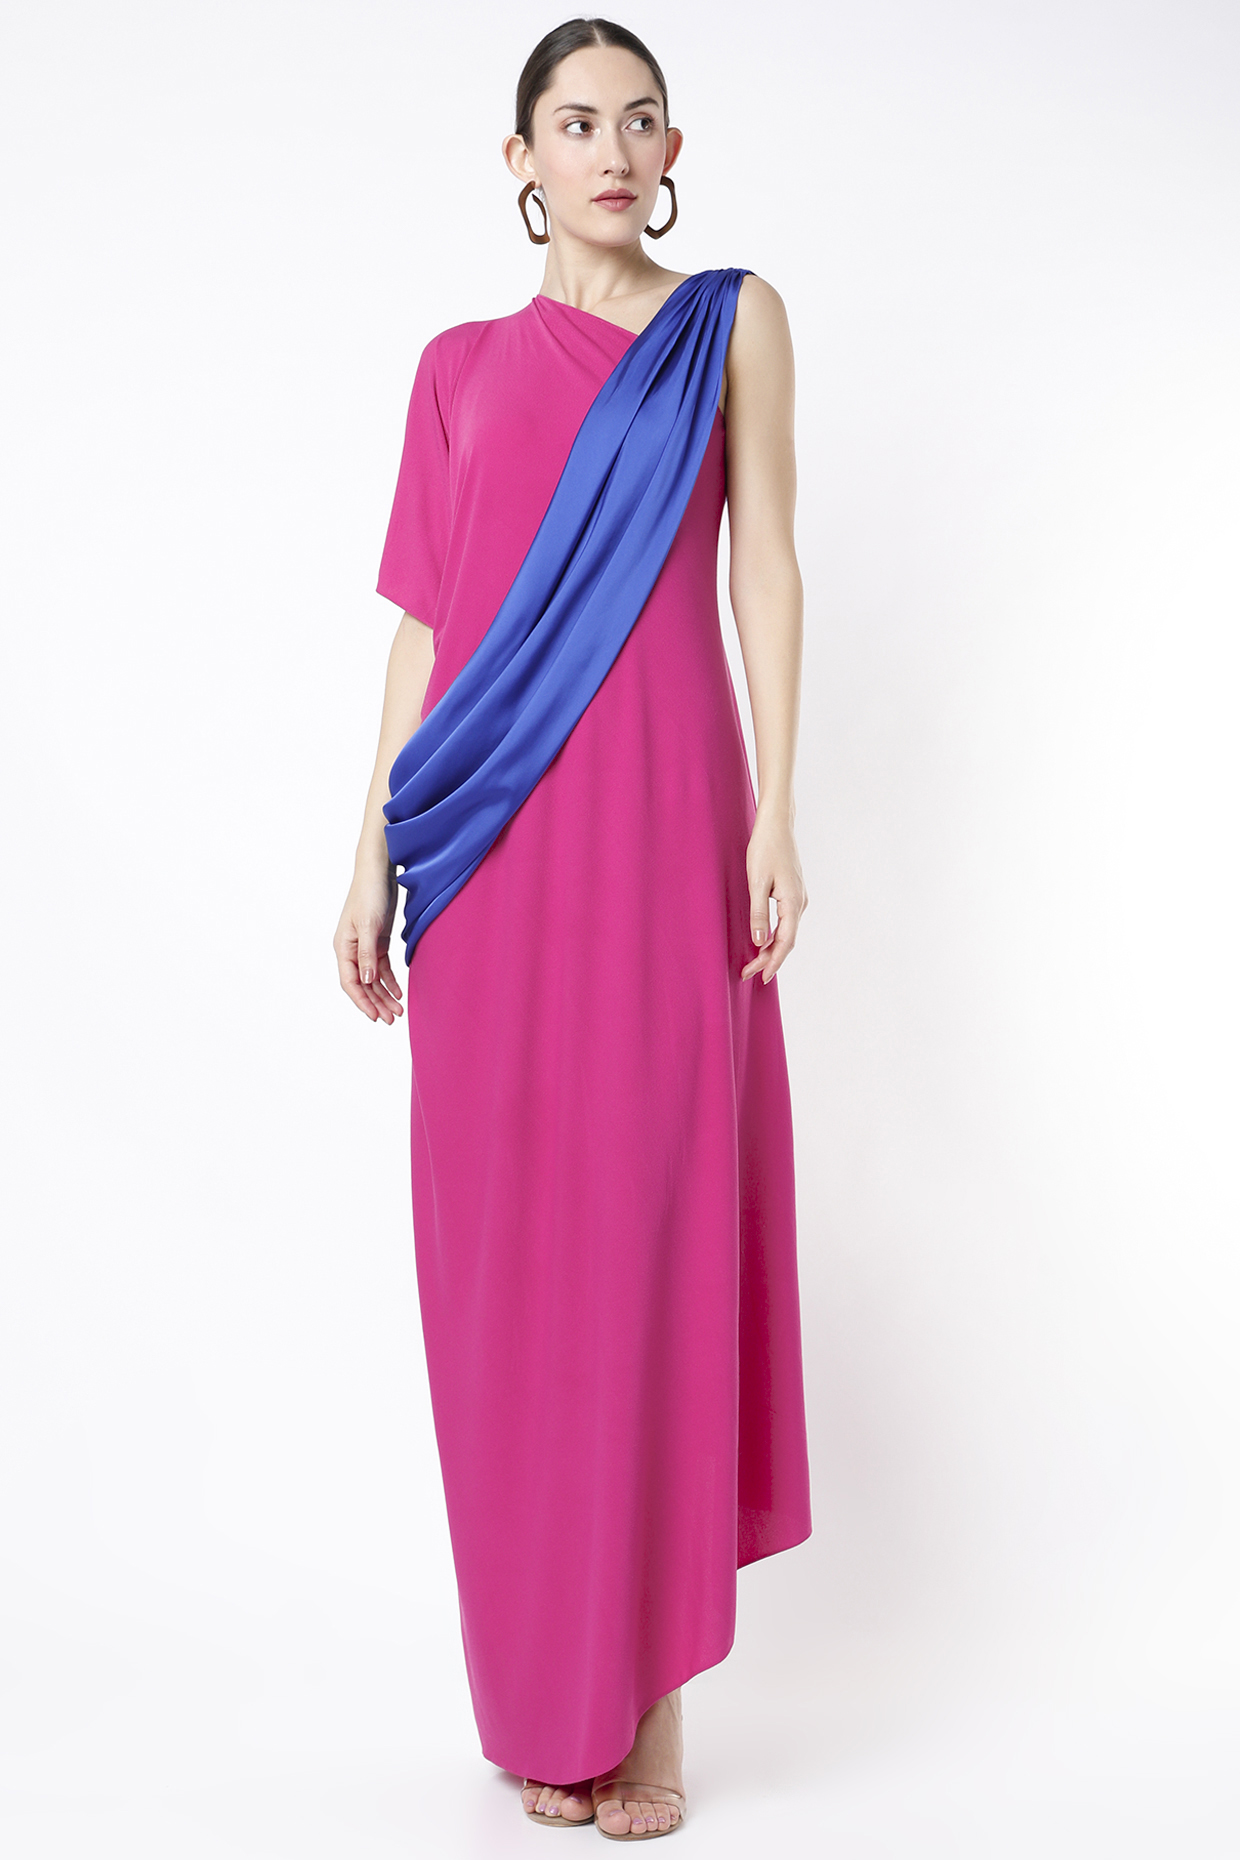 Hot Pink One Shoulder Draped Dress With Contrasting Sash